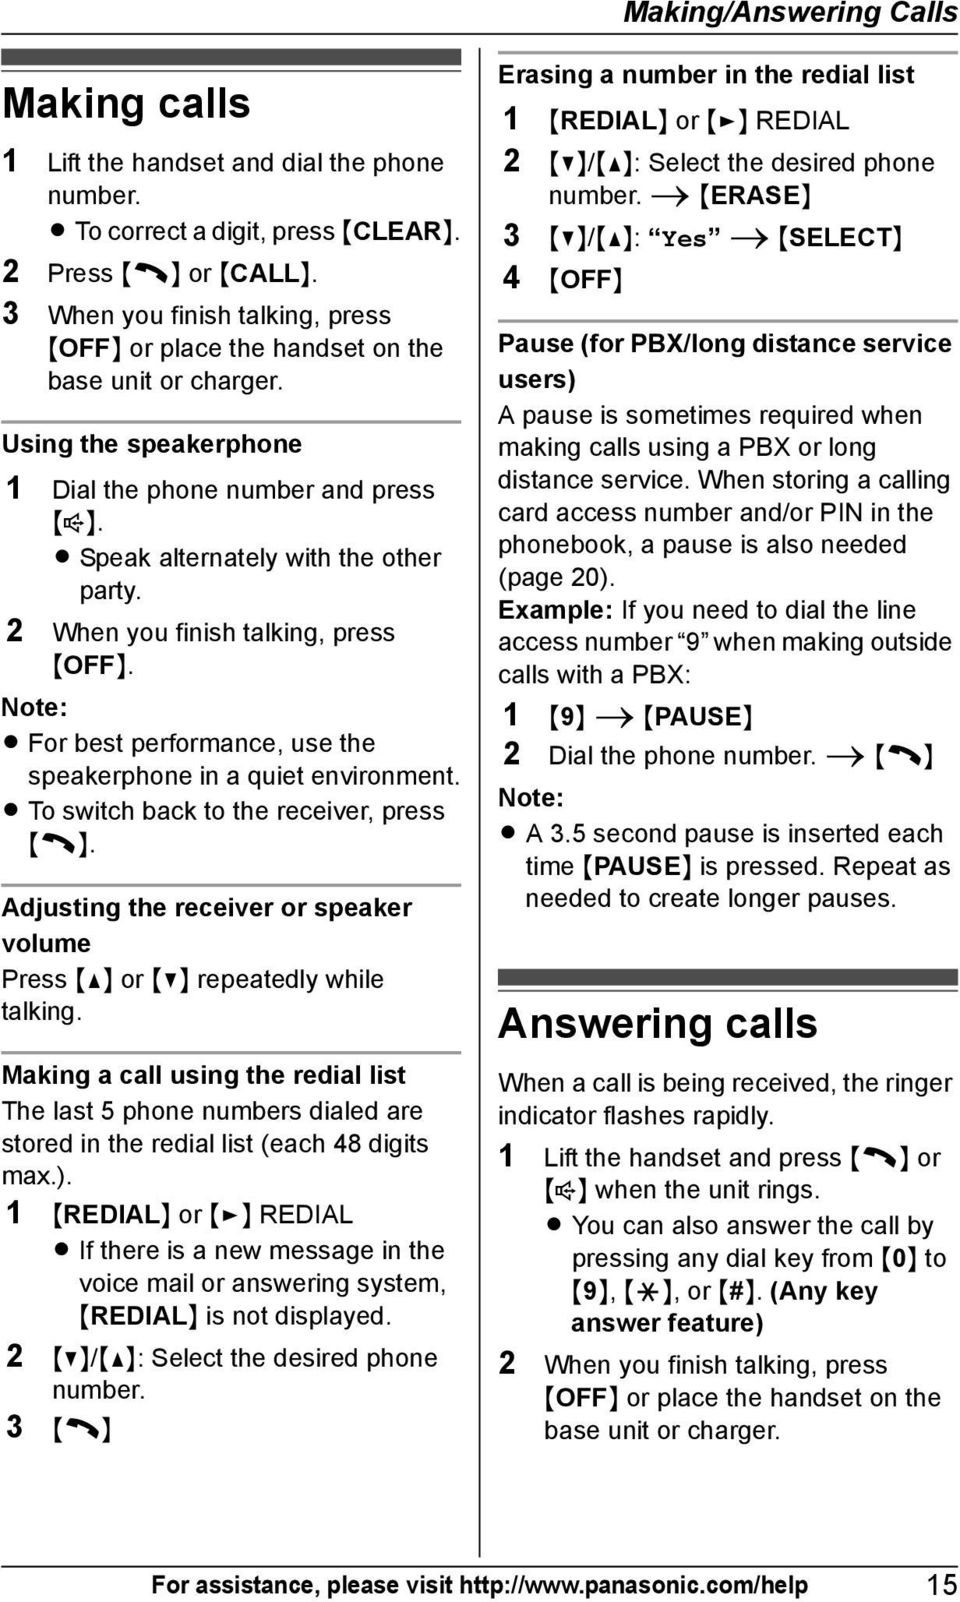 2 When you finish talking, press {OFF}. L For best performance, use the speakerphone in a quiet environment. L To switch back to the receiver, press {C}.